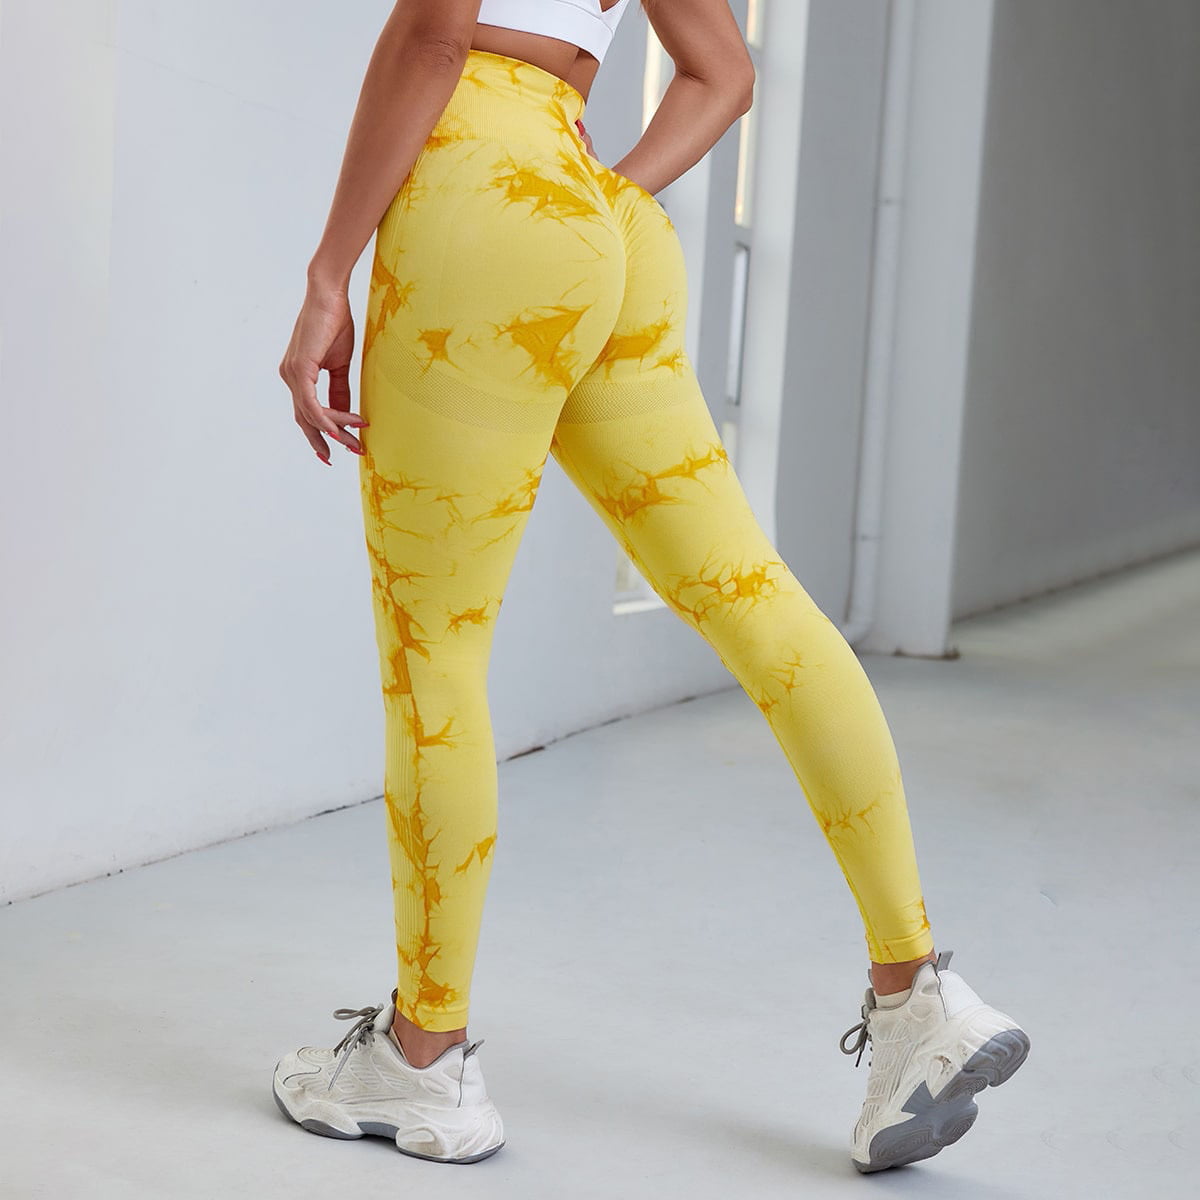 Clothing Gym Legging Fitness Tie Ladies Workout Yoga Sports For Up Push Waist Seamless Pants Women Tights Leggings High Dye